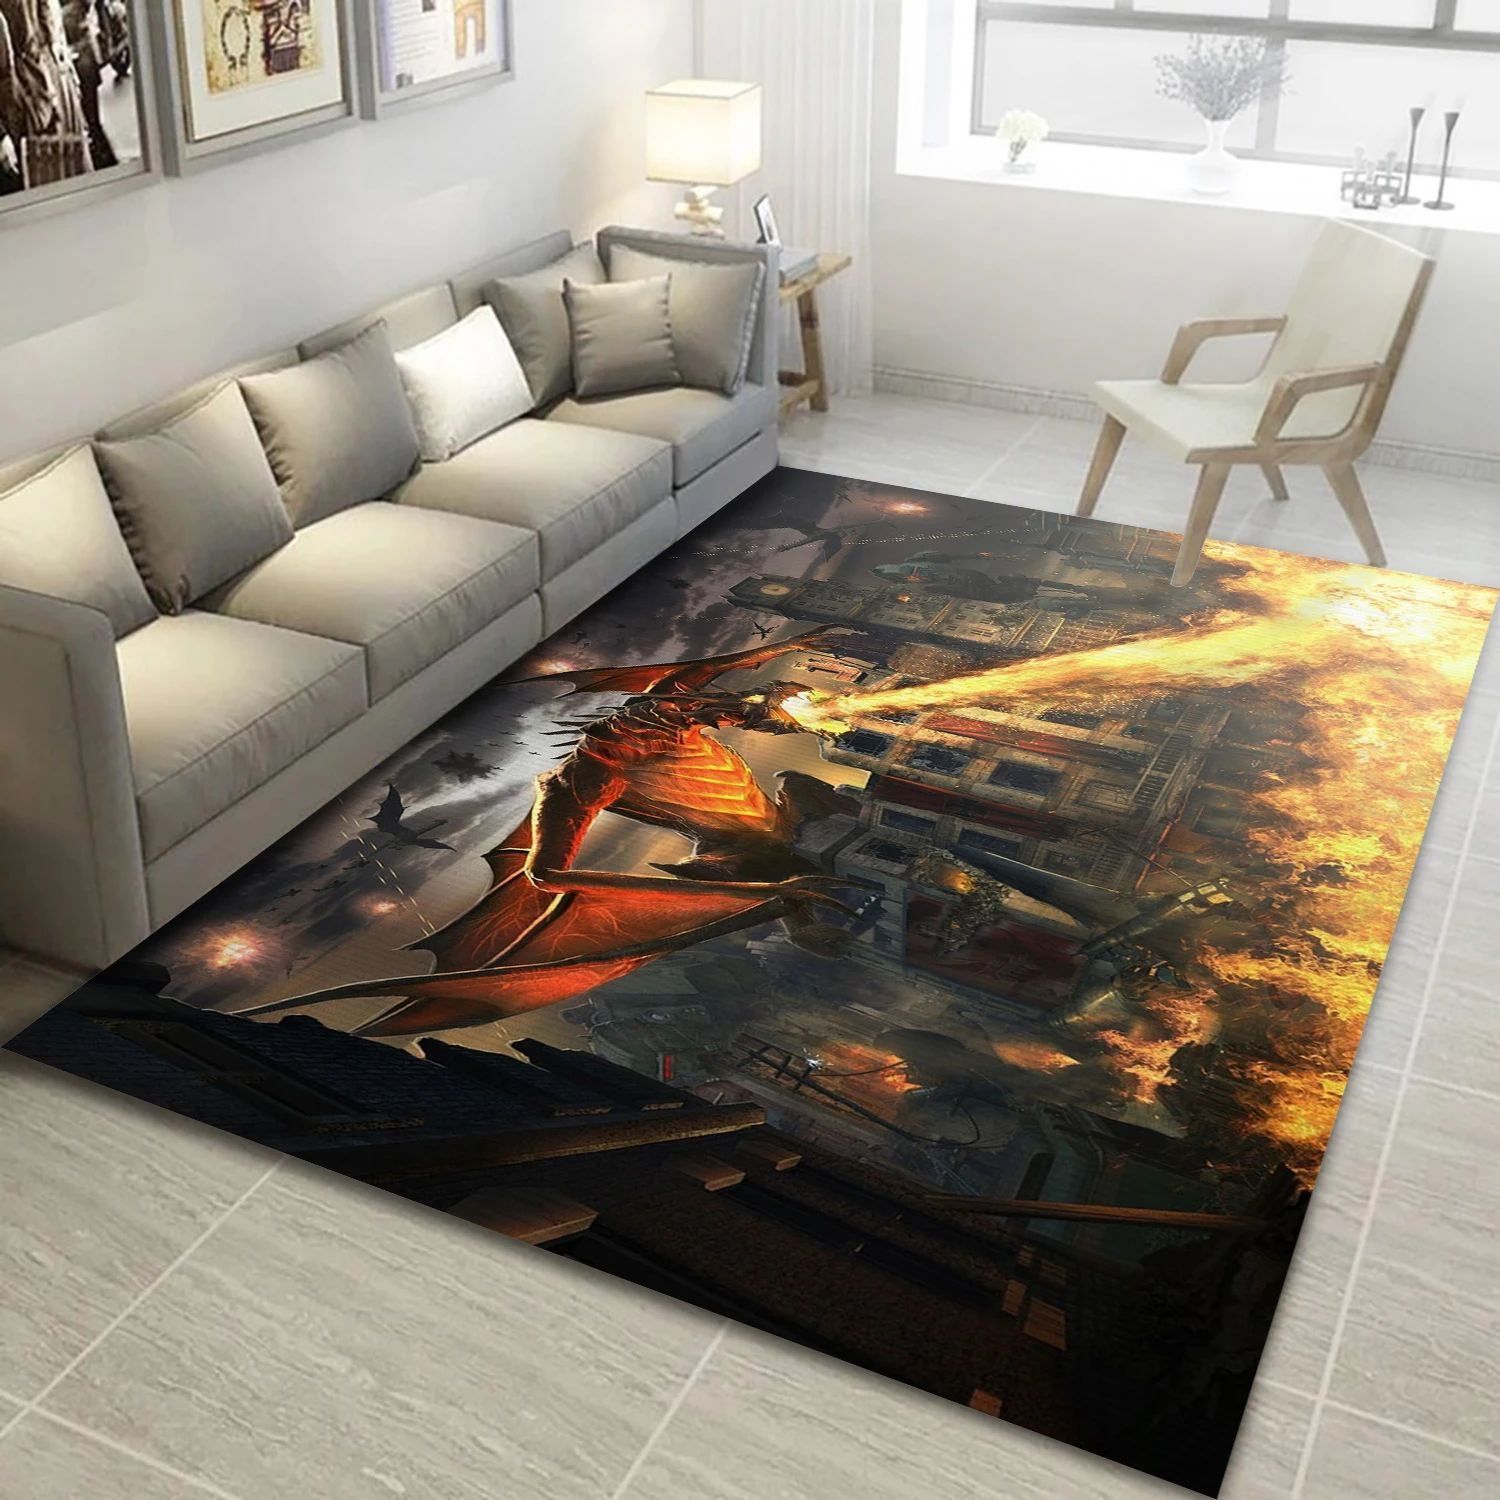 Call Of Duty Black Ops Iii Video Game Area Rug For Christmas, Living Room Rug - Home Decor Floor Decor - Indoor Outdoor Rugs 2